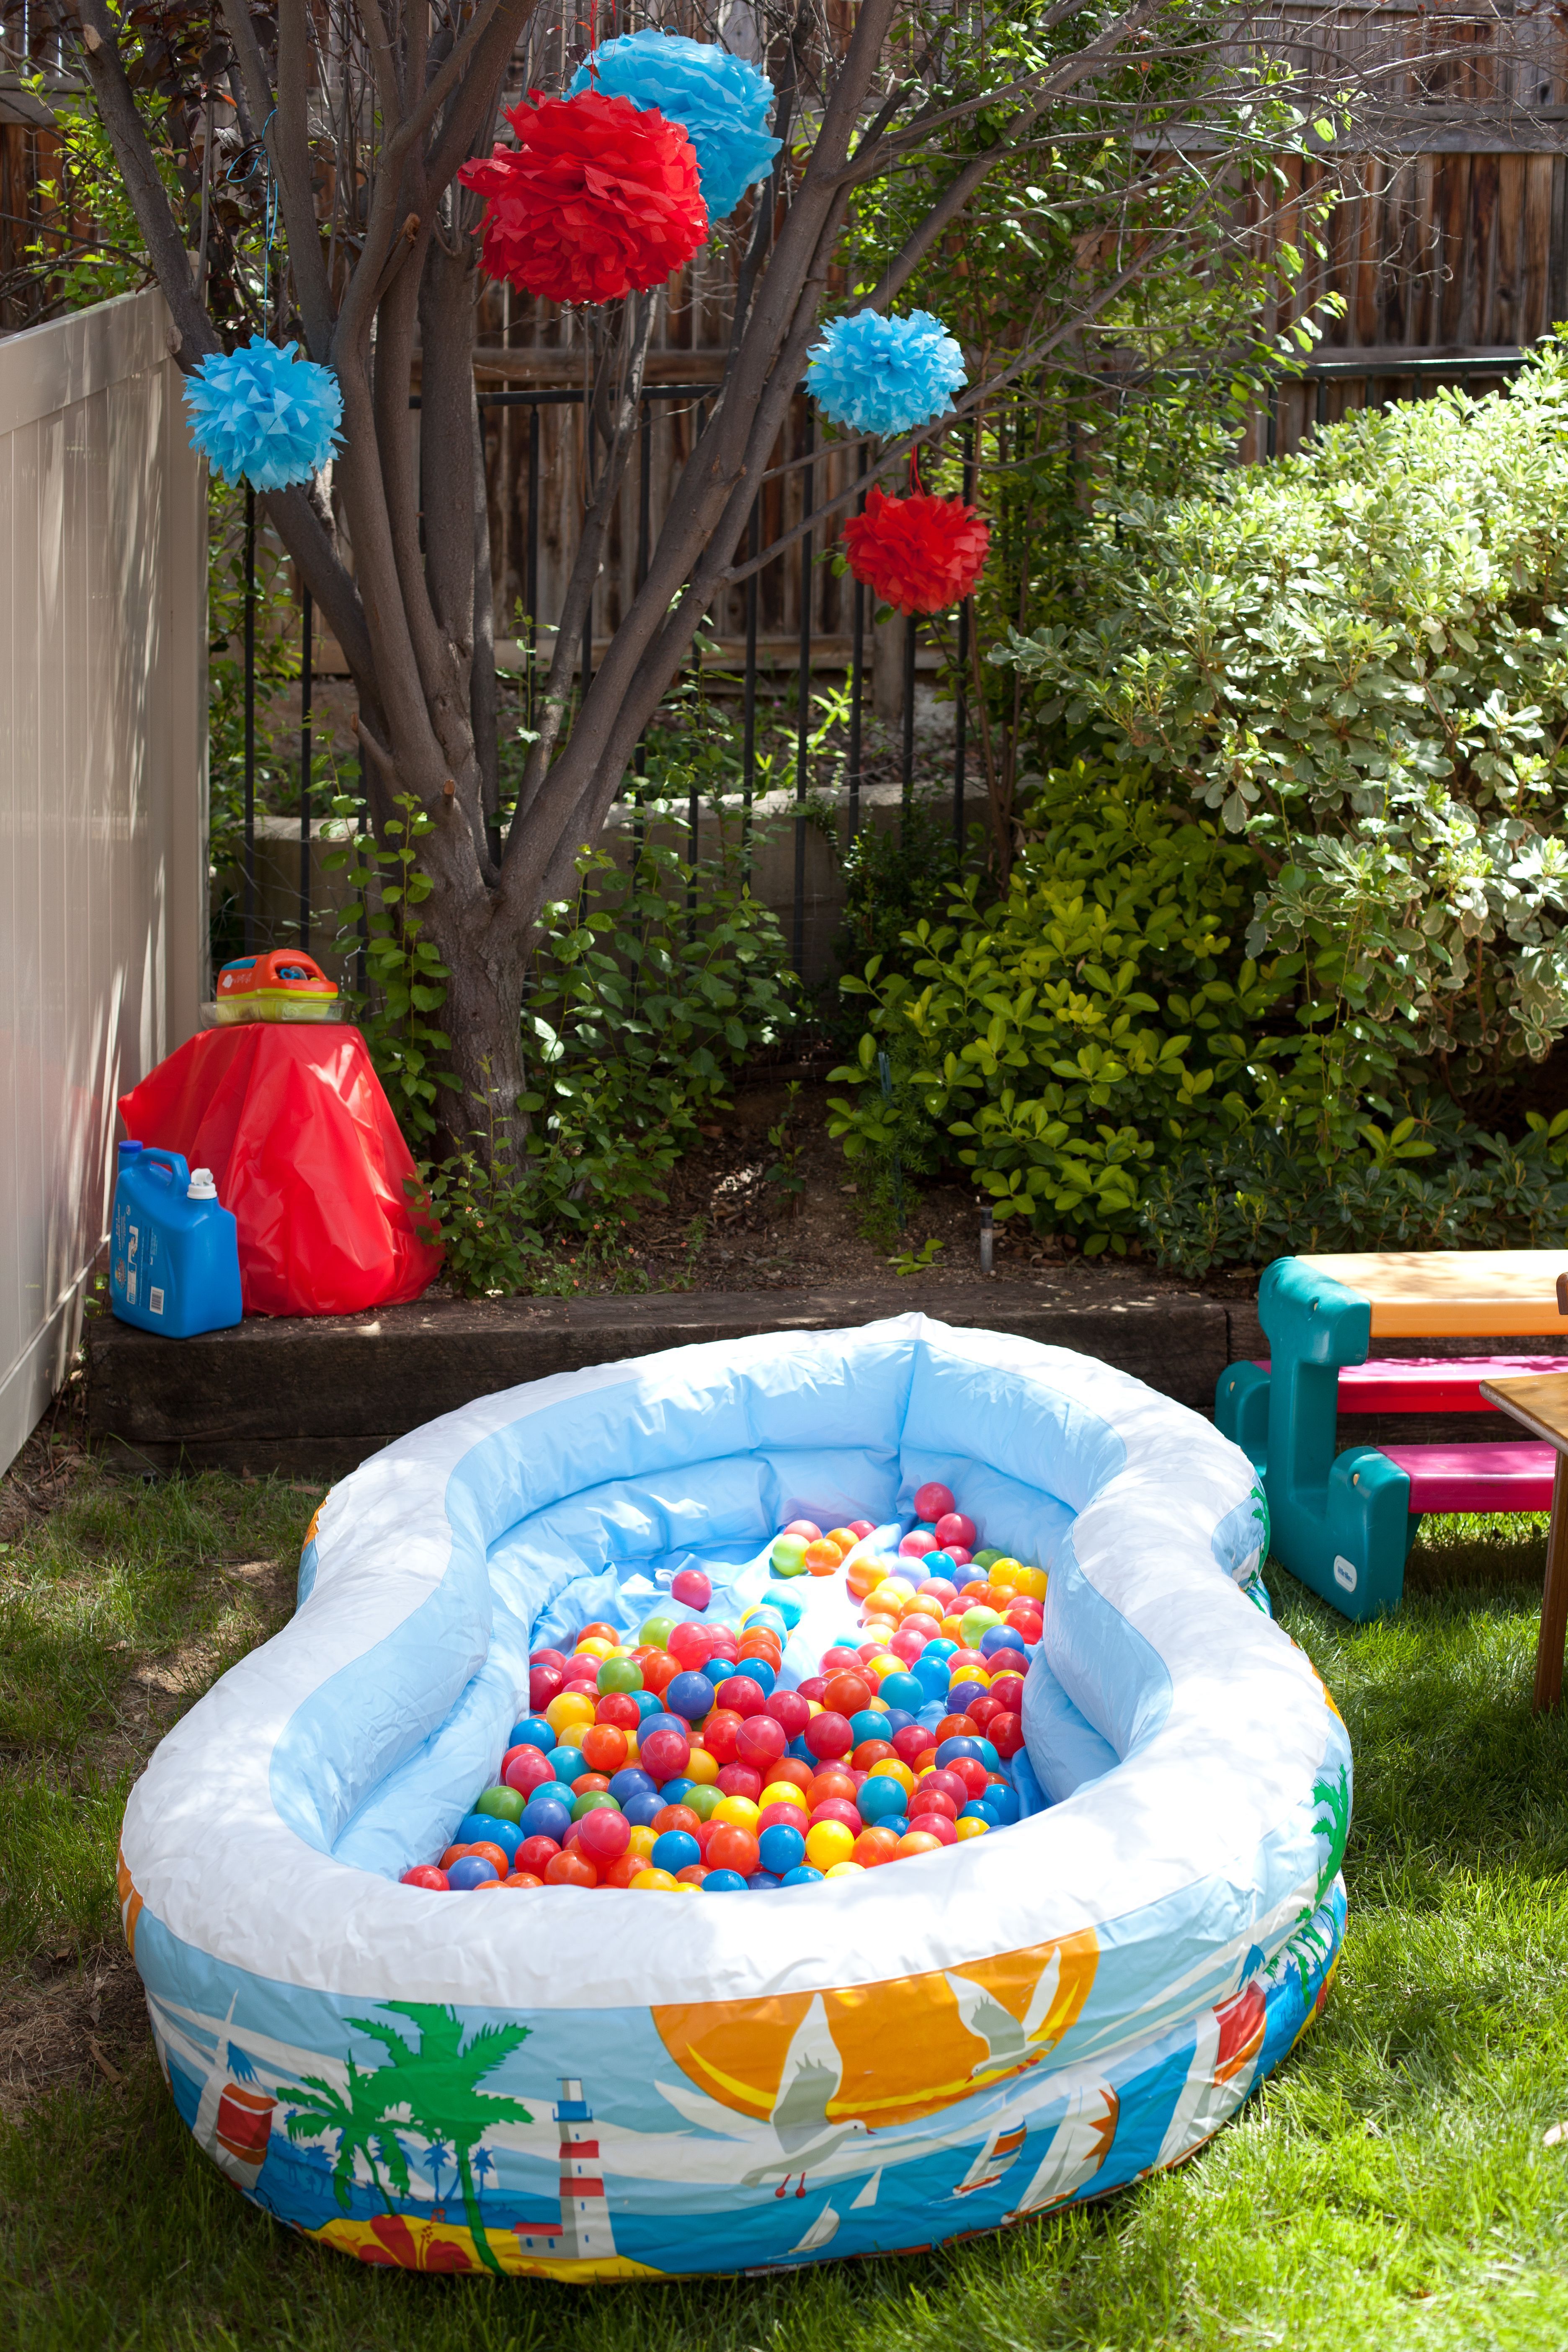 1st Birthday Party Activity / Entertainment: Ball Pit! Great idea considering baby #2s birthday will be in July!